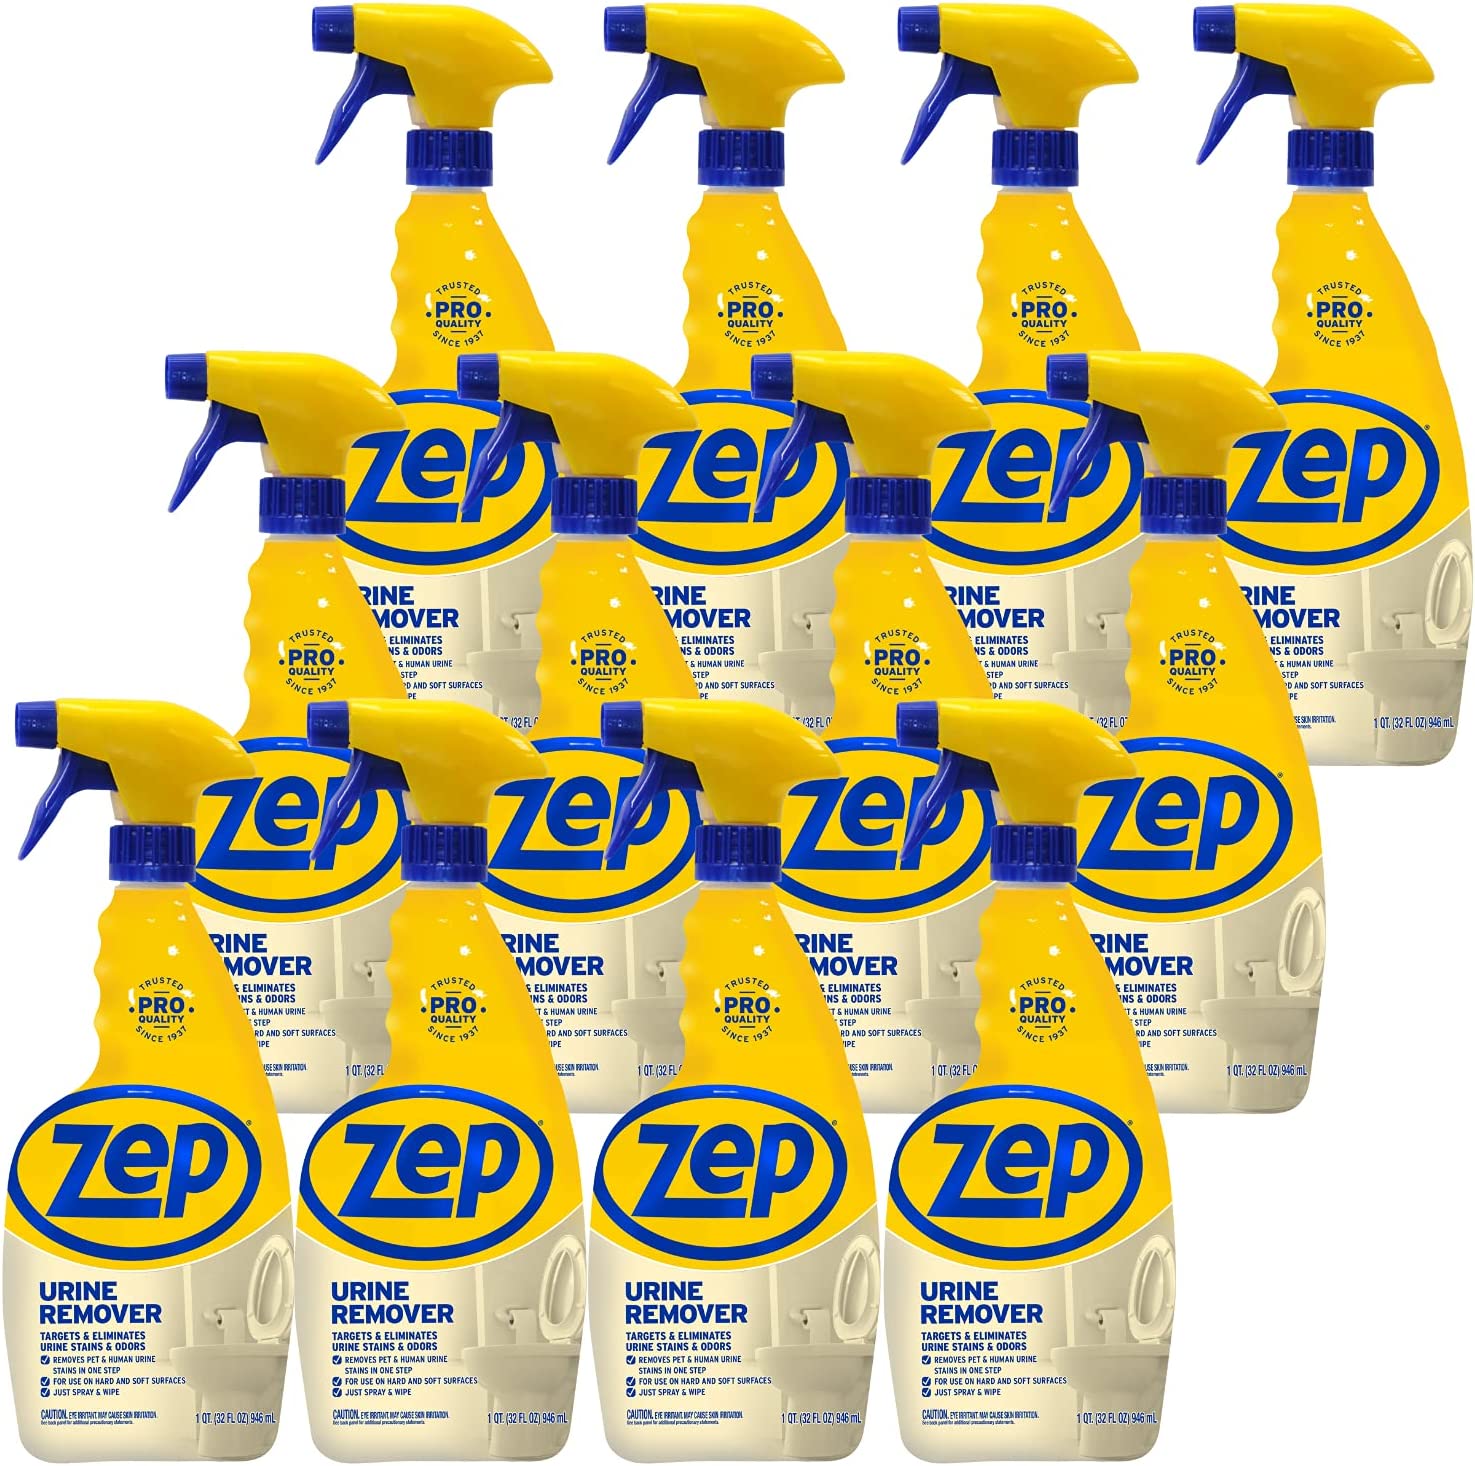 Zep 32 fl. oz. Grout Cleaner and Brightener (Pack of 2)